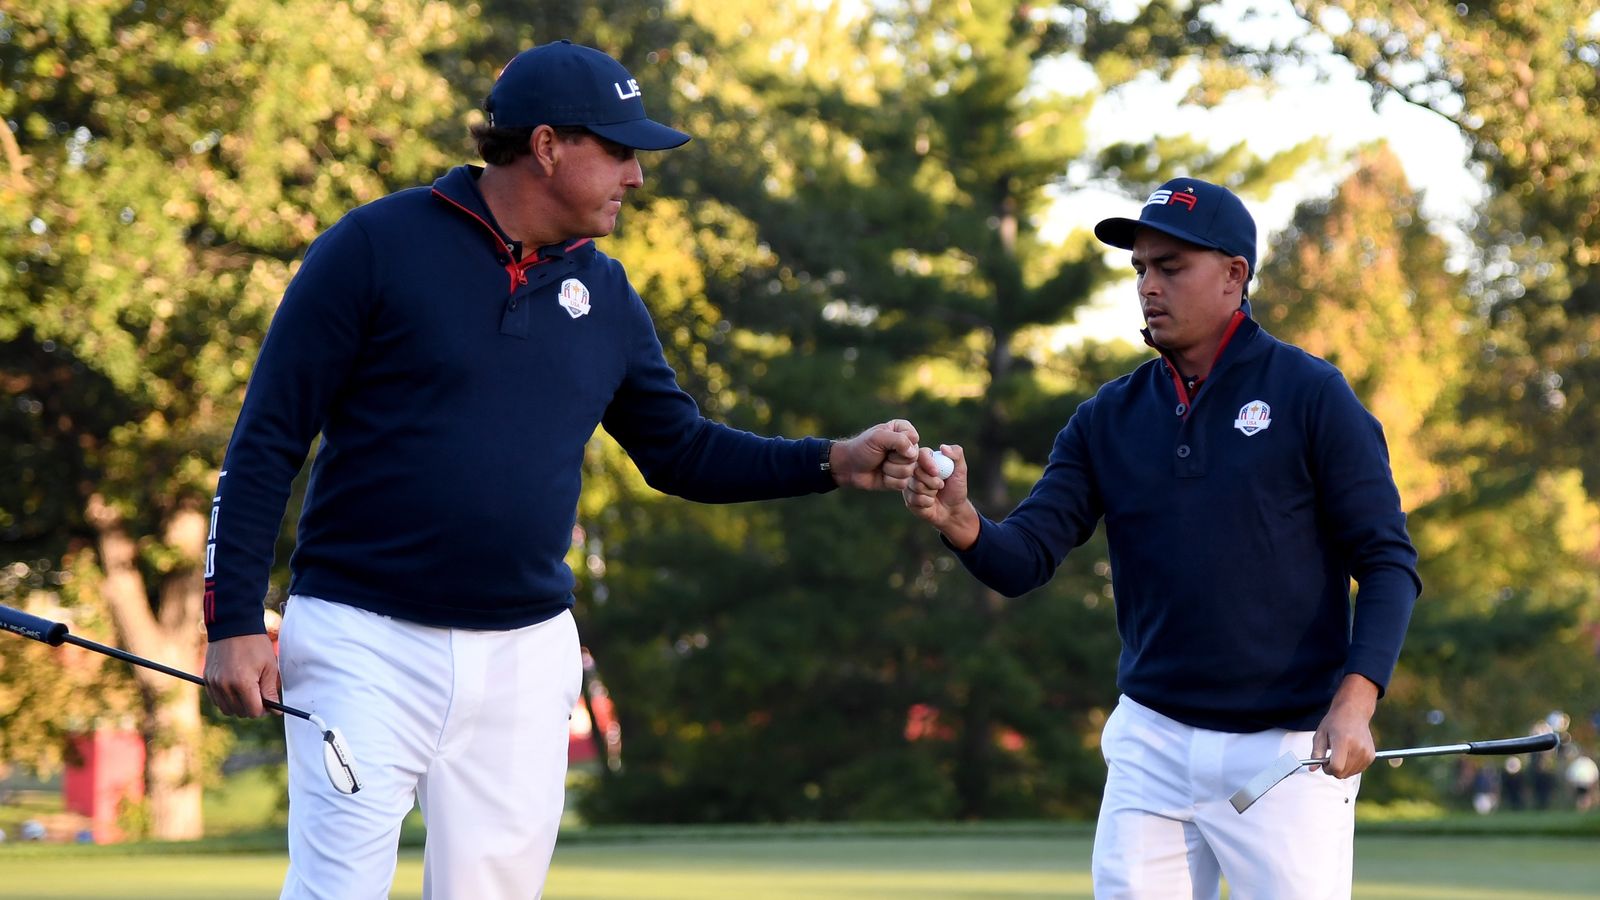 Ryder Cup Thomas Pieters and Rickie Fowler exchange birdies at first